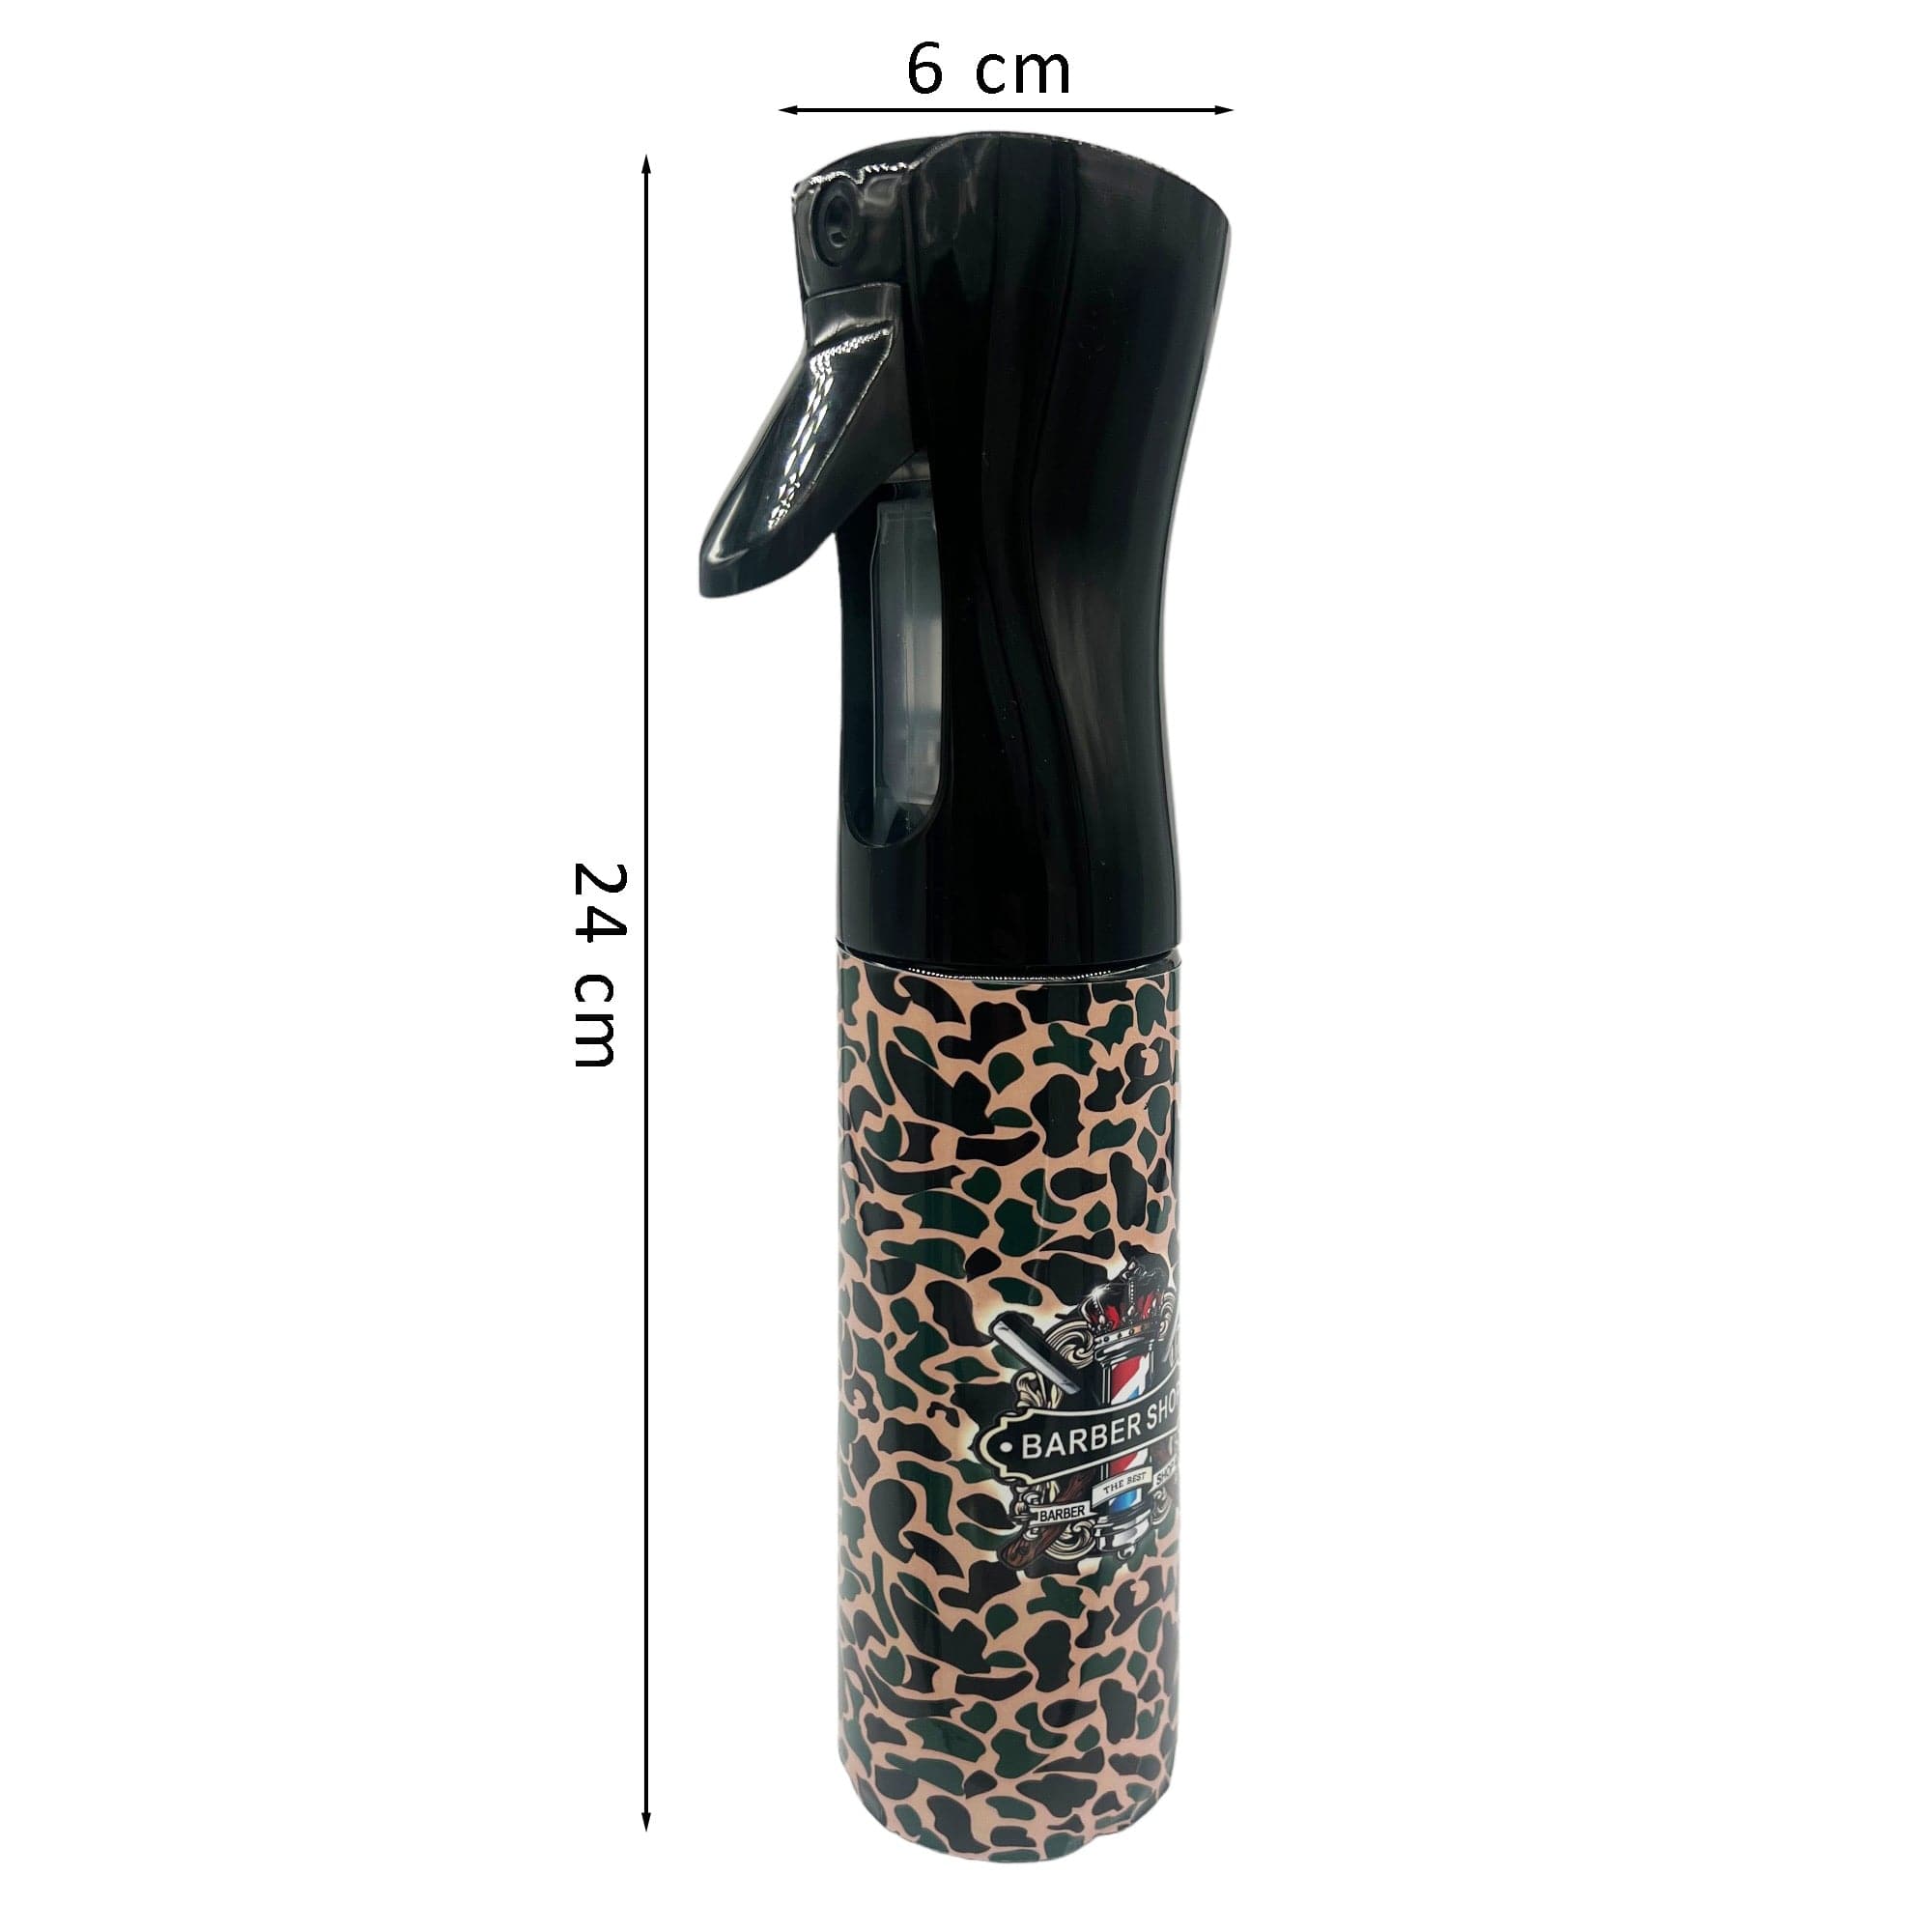 Eson - Water Spray Bottle 300ml Empty Refillable Continuous Water (Camouflage) - Eson Direct